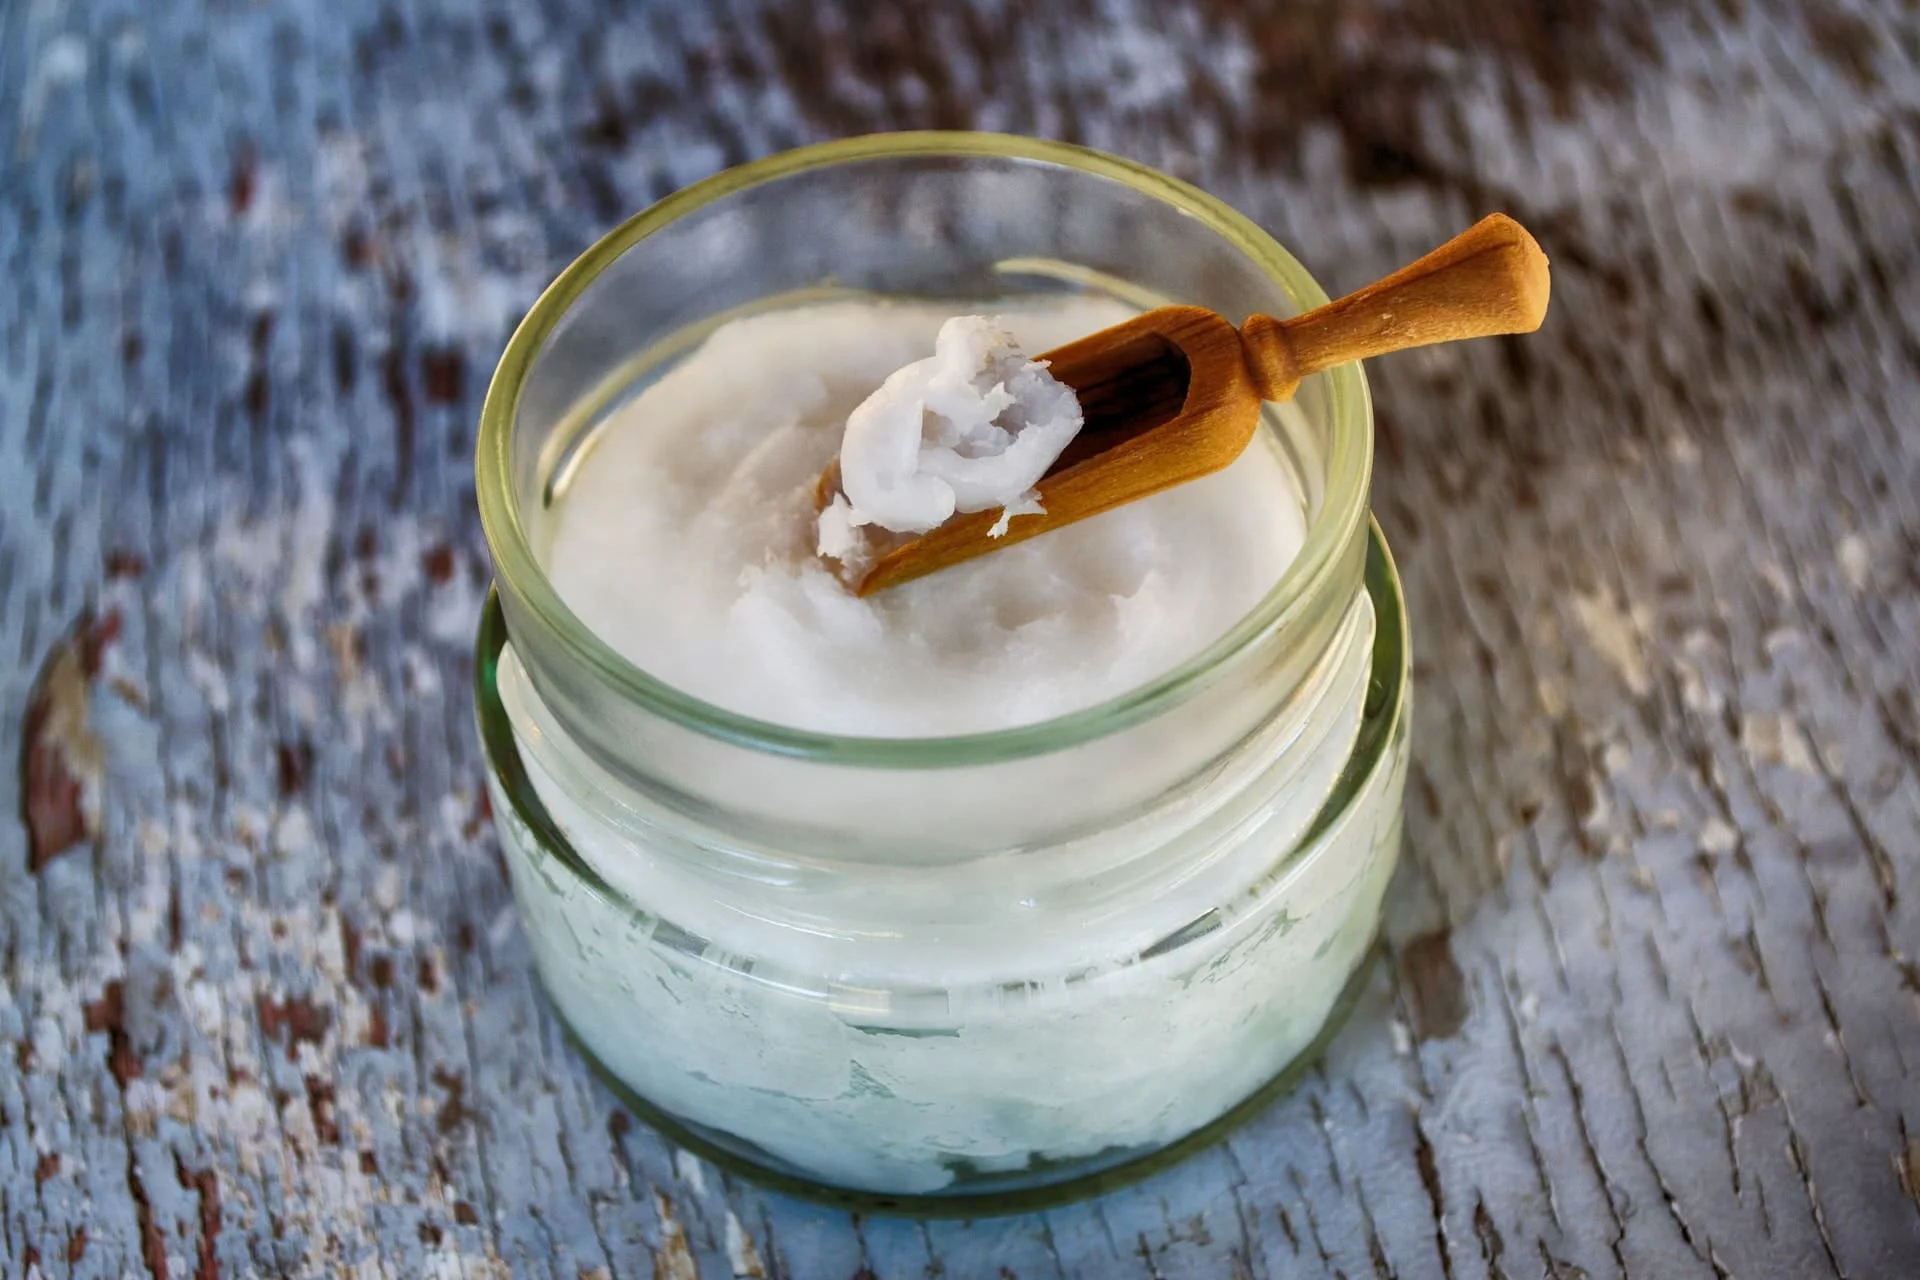 Coconut oil in a jar with a wooden measuring spoon